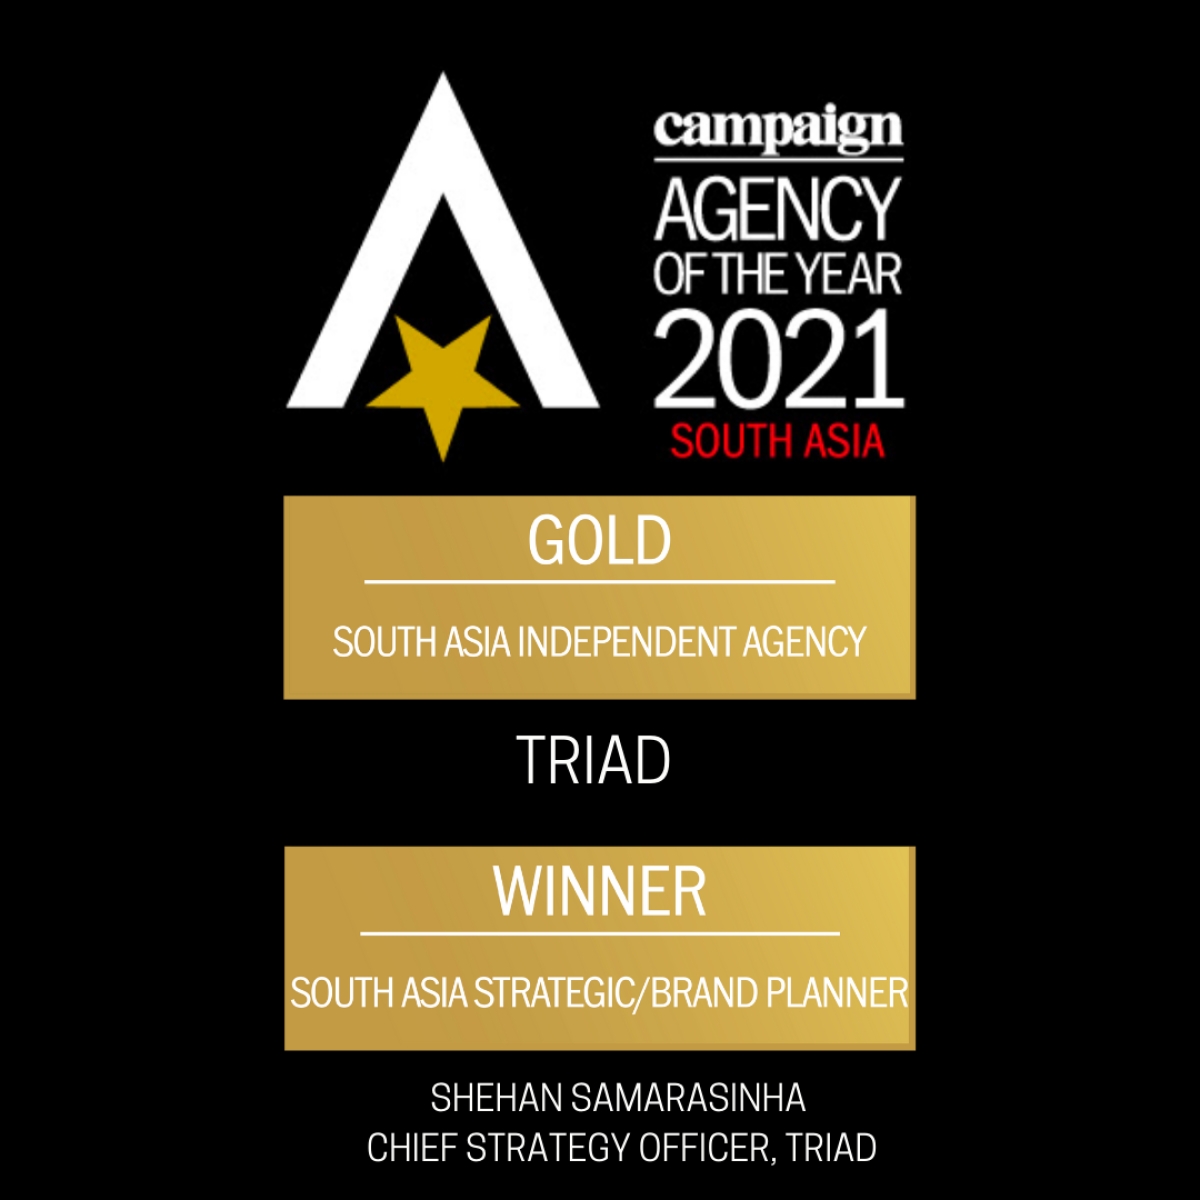 Triad, Sri Lanka’s 1st agency to win “South Asia Independent Agency”